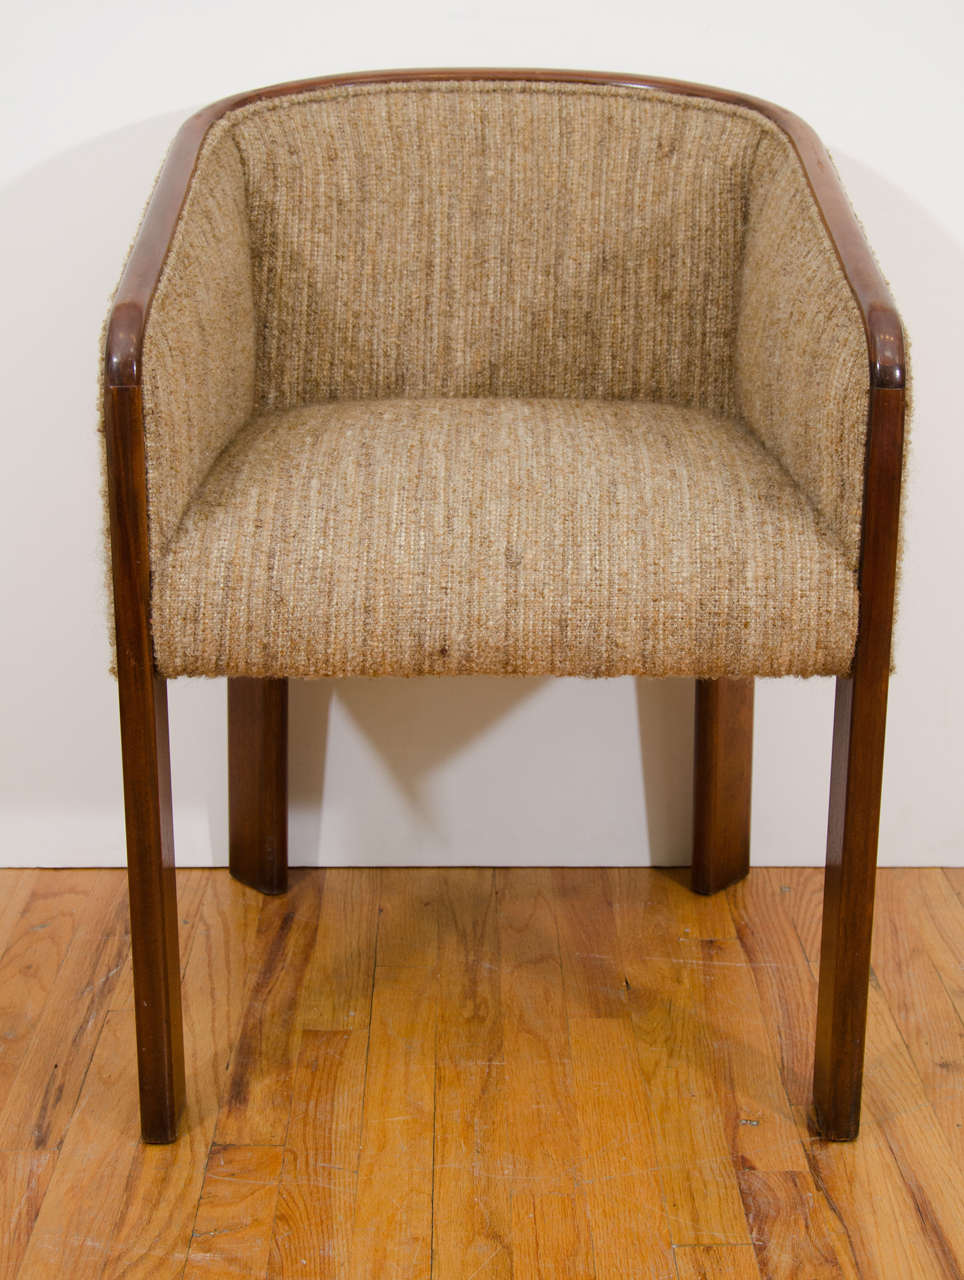 A pair of vintage tub armchairs, produced circa 1970s by Baker Furniture, upholstered in nubby wool against a wood frame. Markings include the original label [Baker Furniture] on the bottom. Very good condition, wear consistent with age and use,